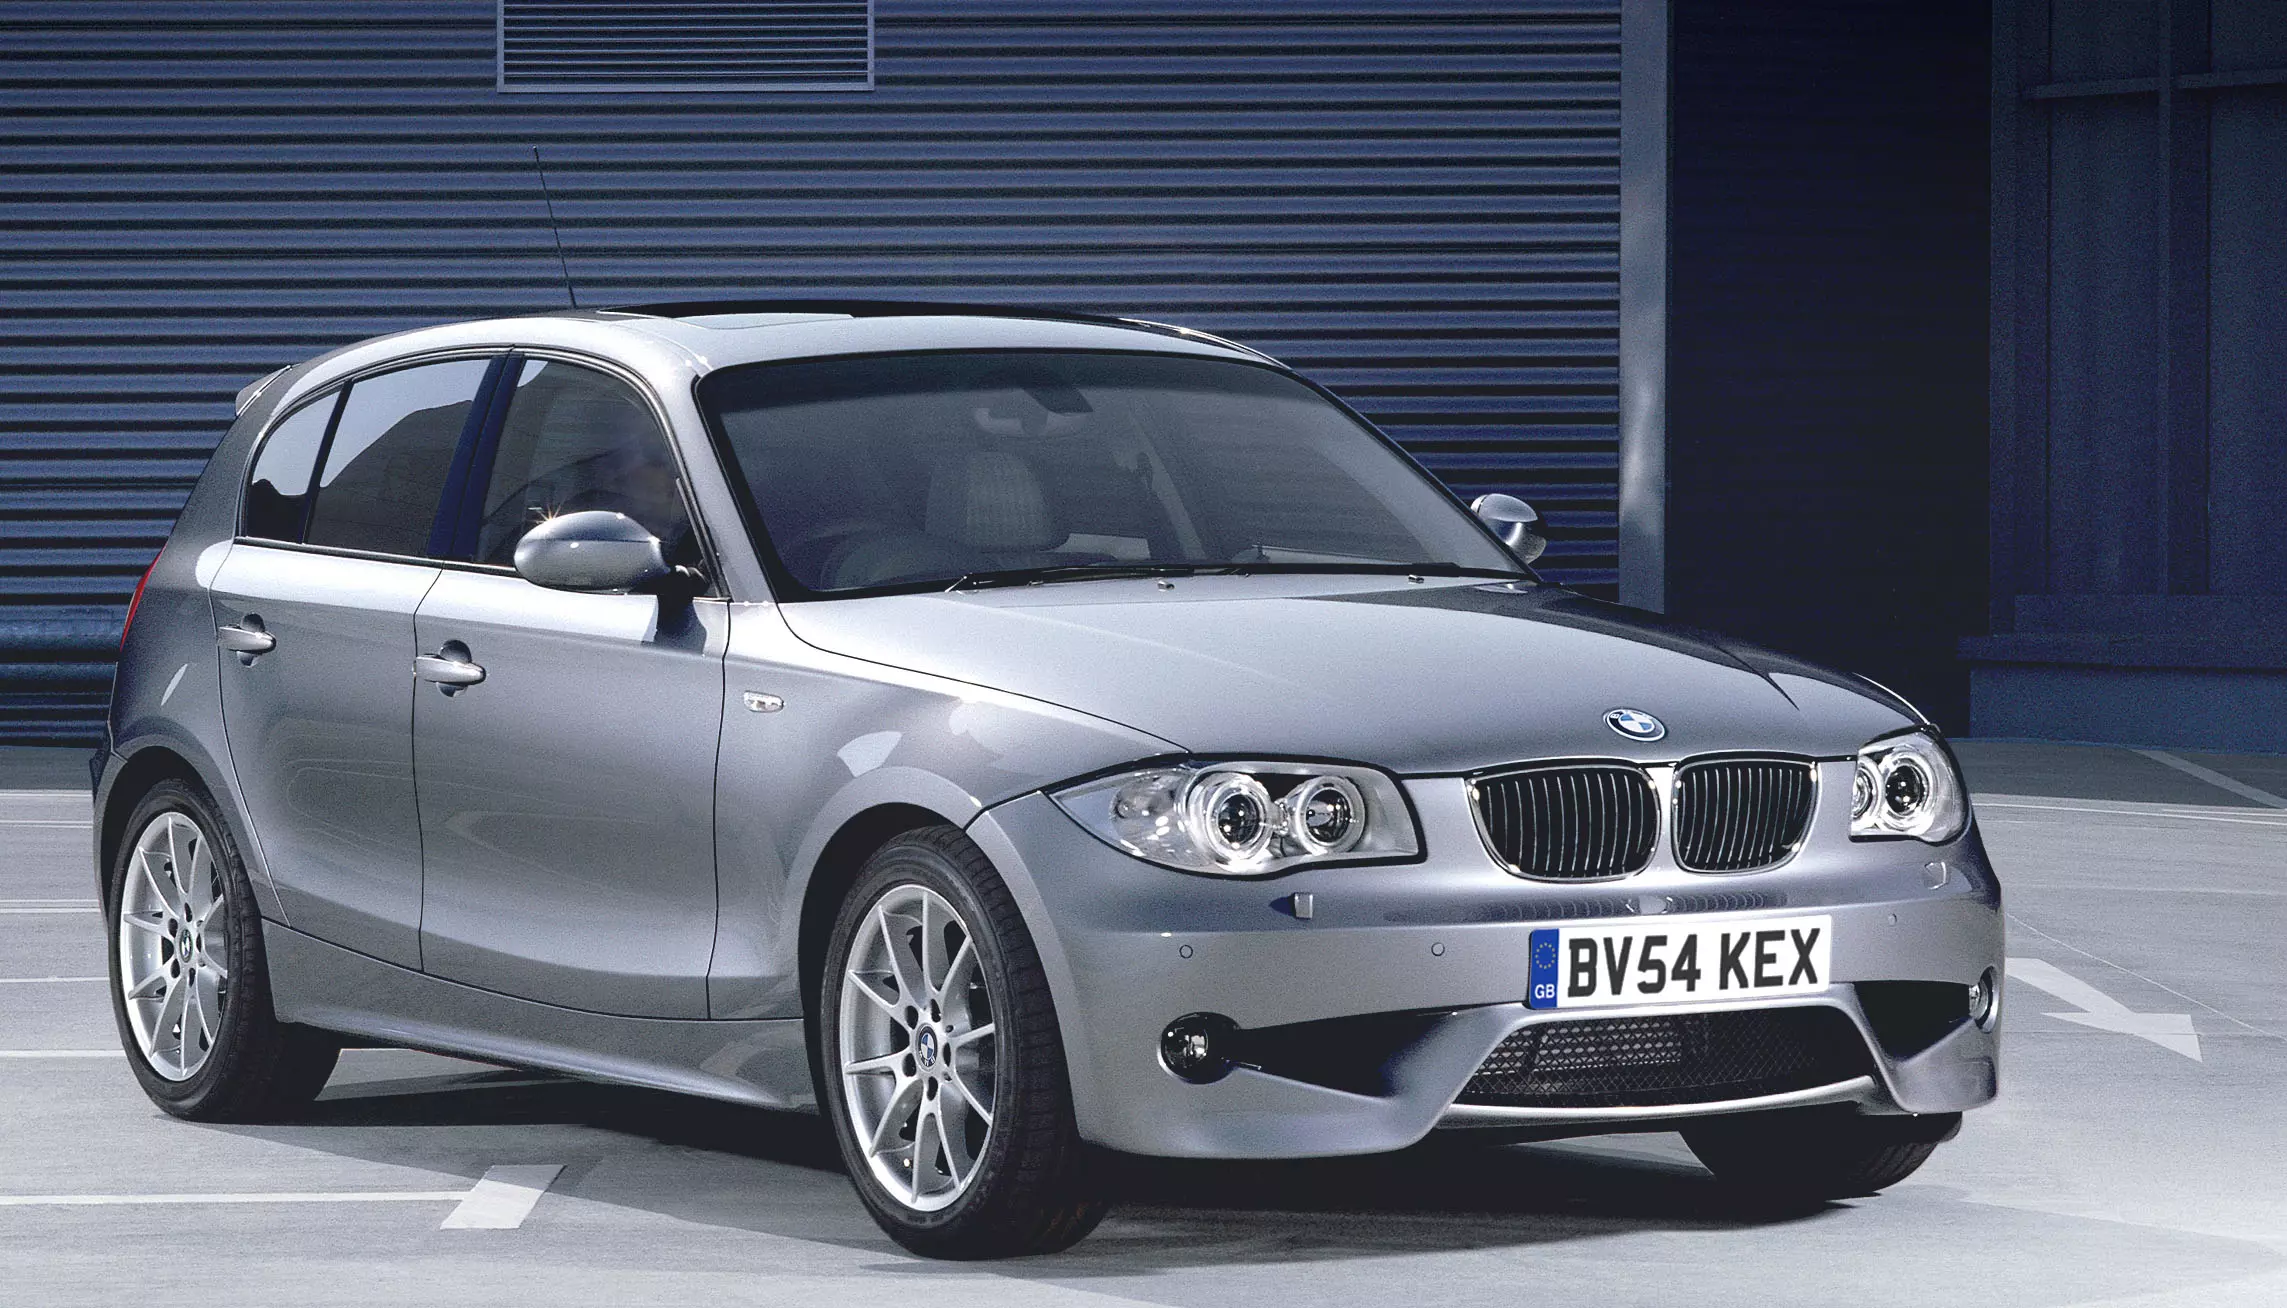 BMW E87 1-Series Problems (2004-2013) - Buyers Guide & Reliability